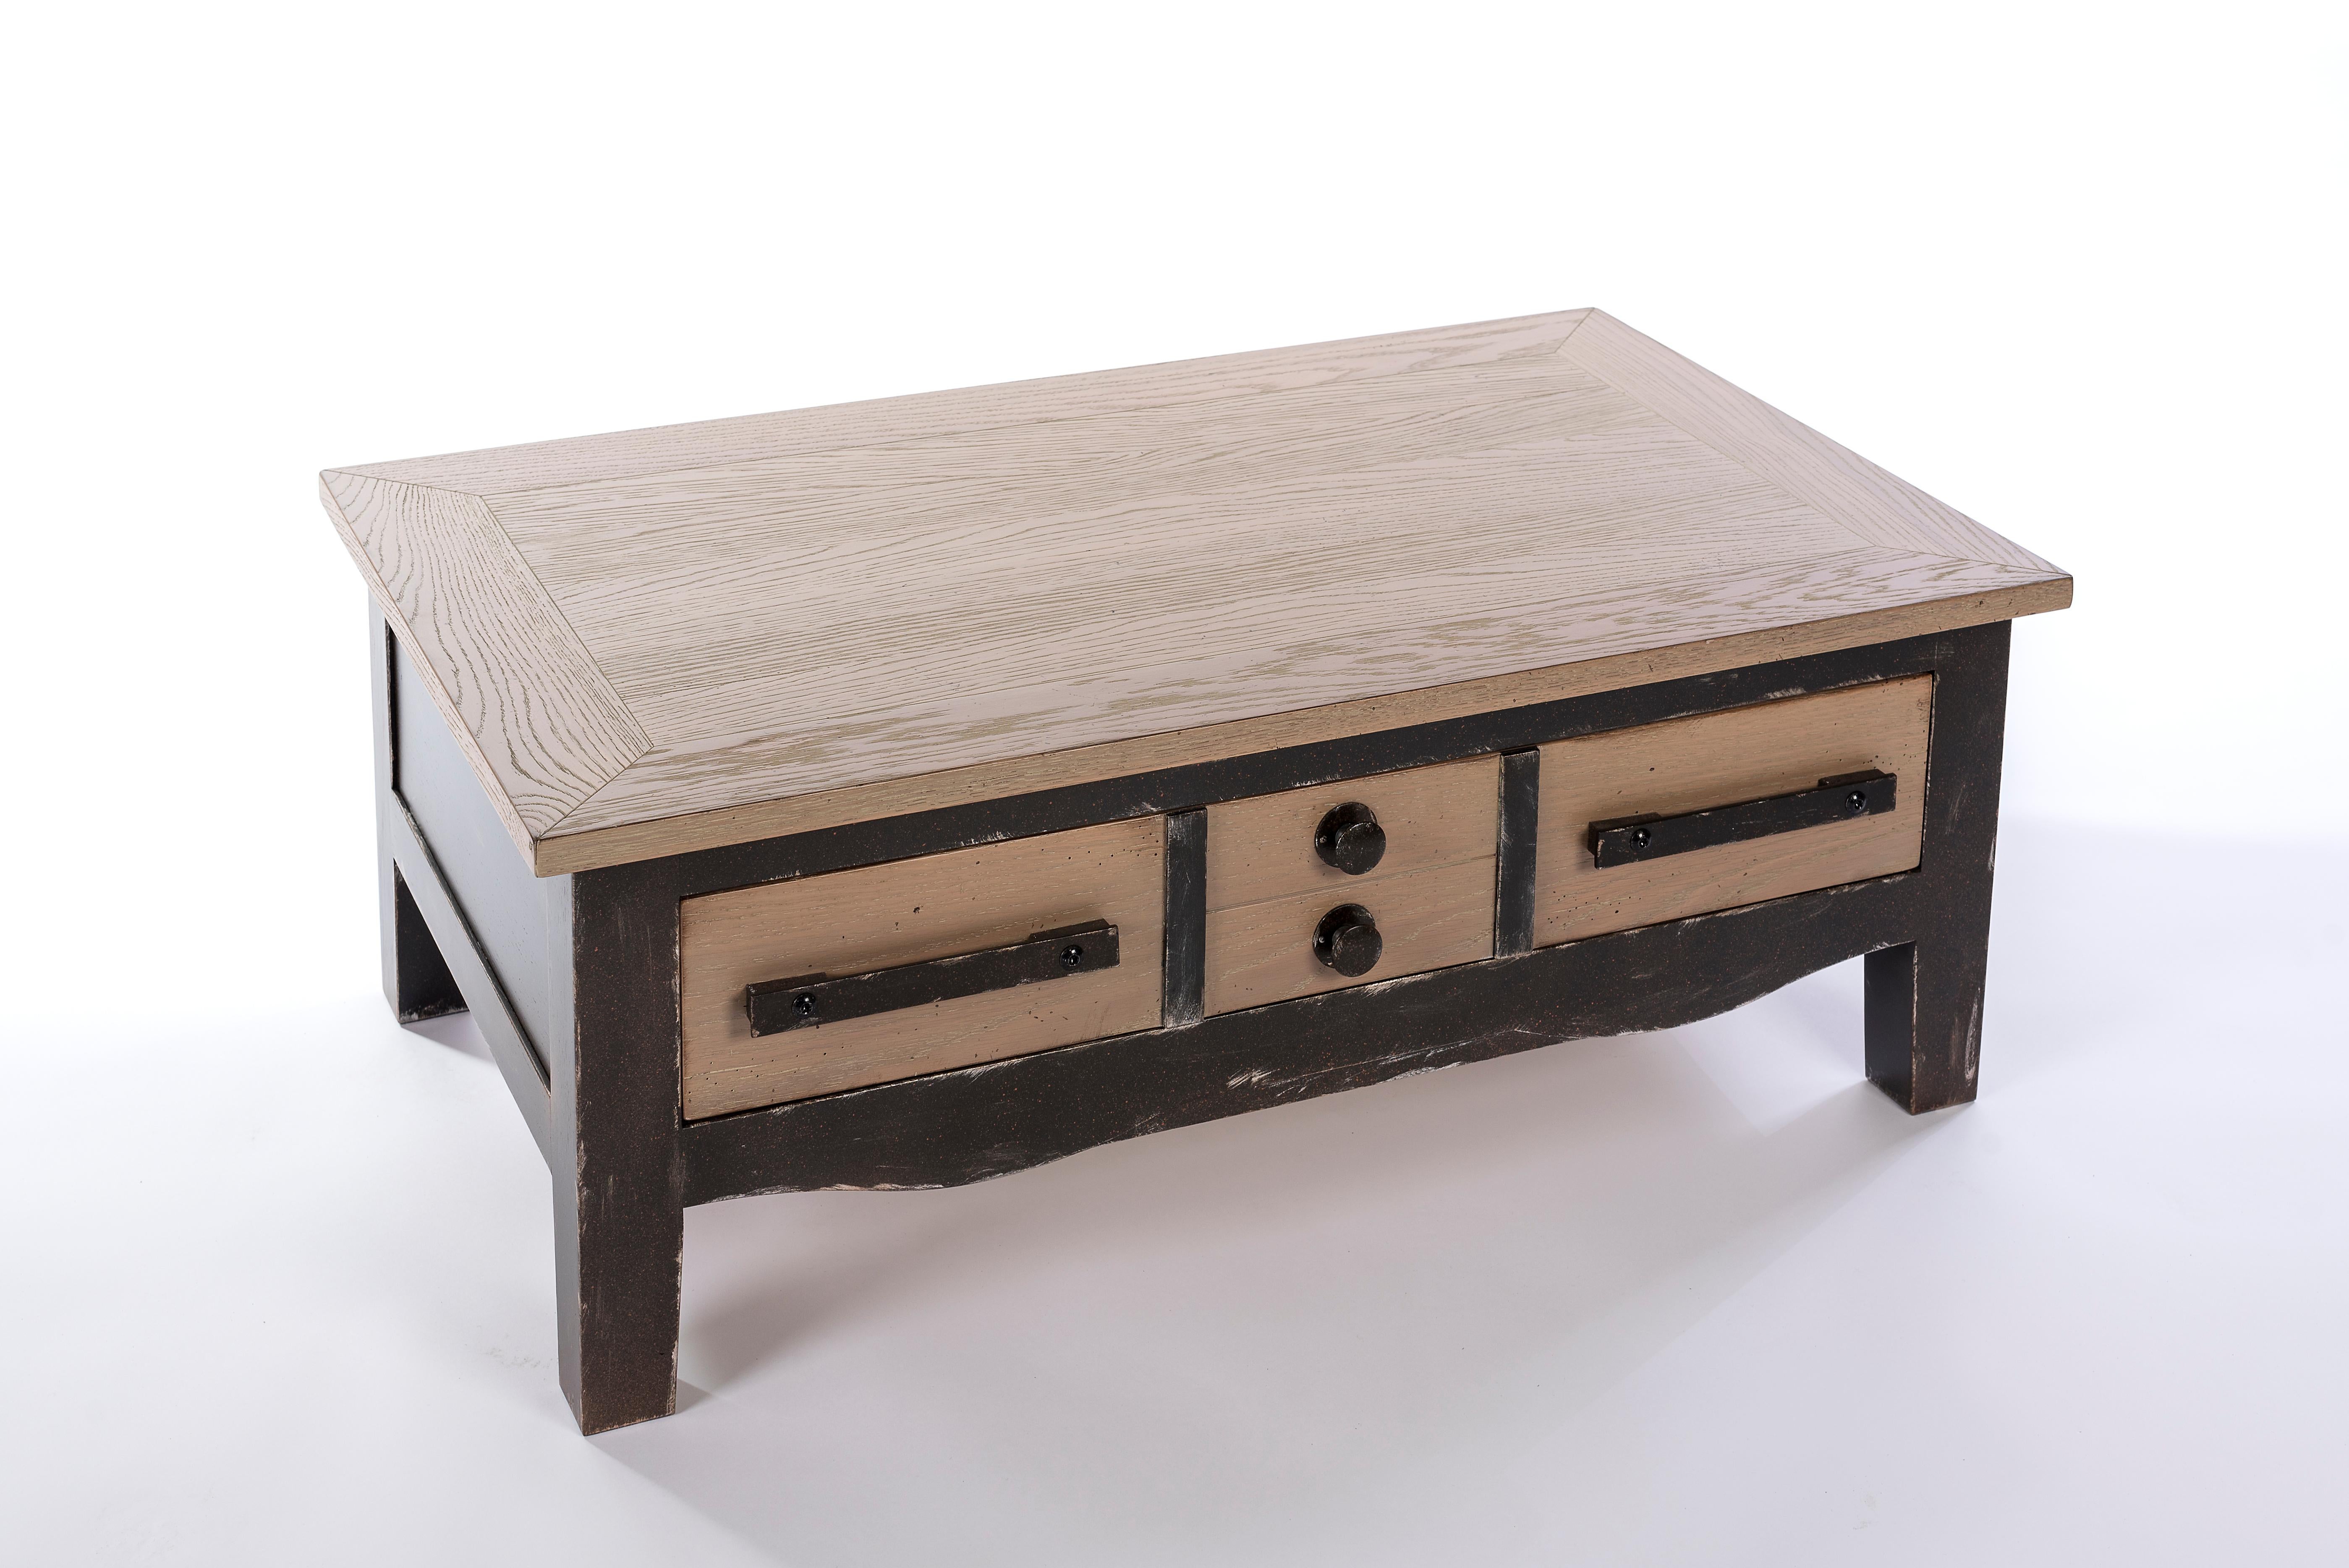 This coffee table from a French Countryside style is reinvented with dark colors and a unique finishing as an imitation gun metal to present an Industrial Style. 

The table features one large back and forth drawer in oak. 

The sourcing of the